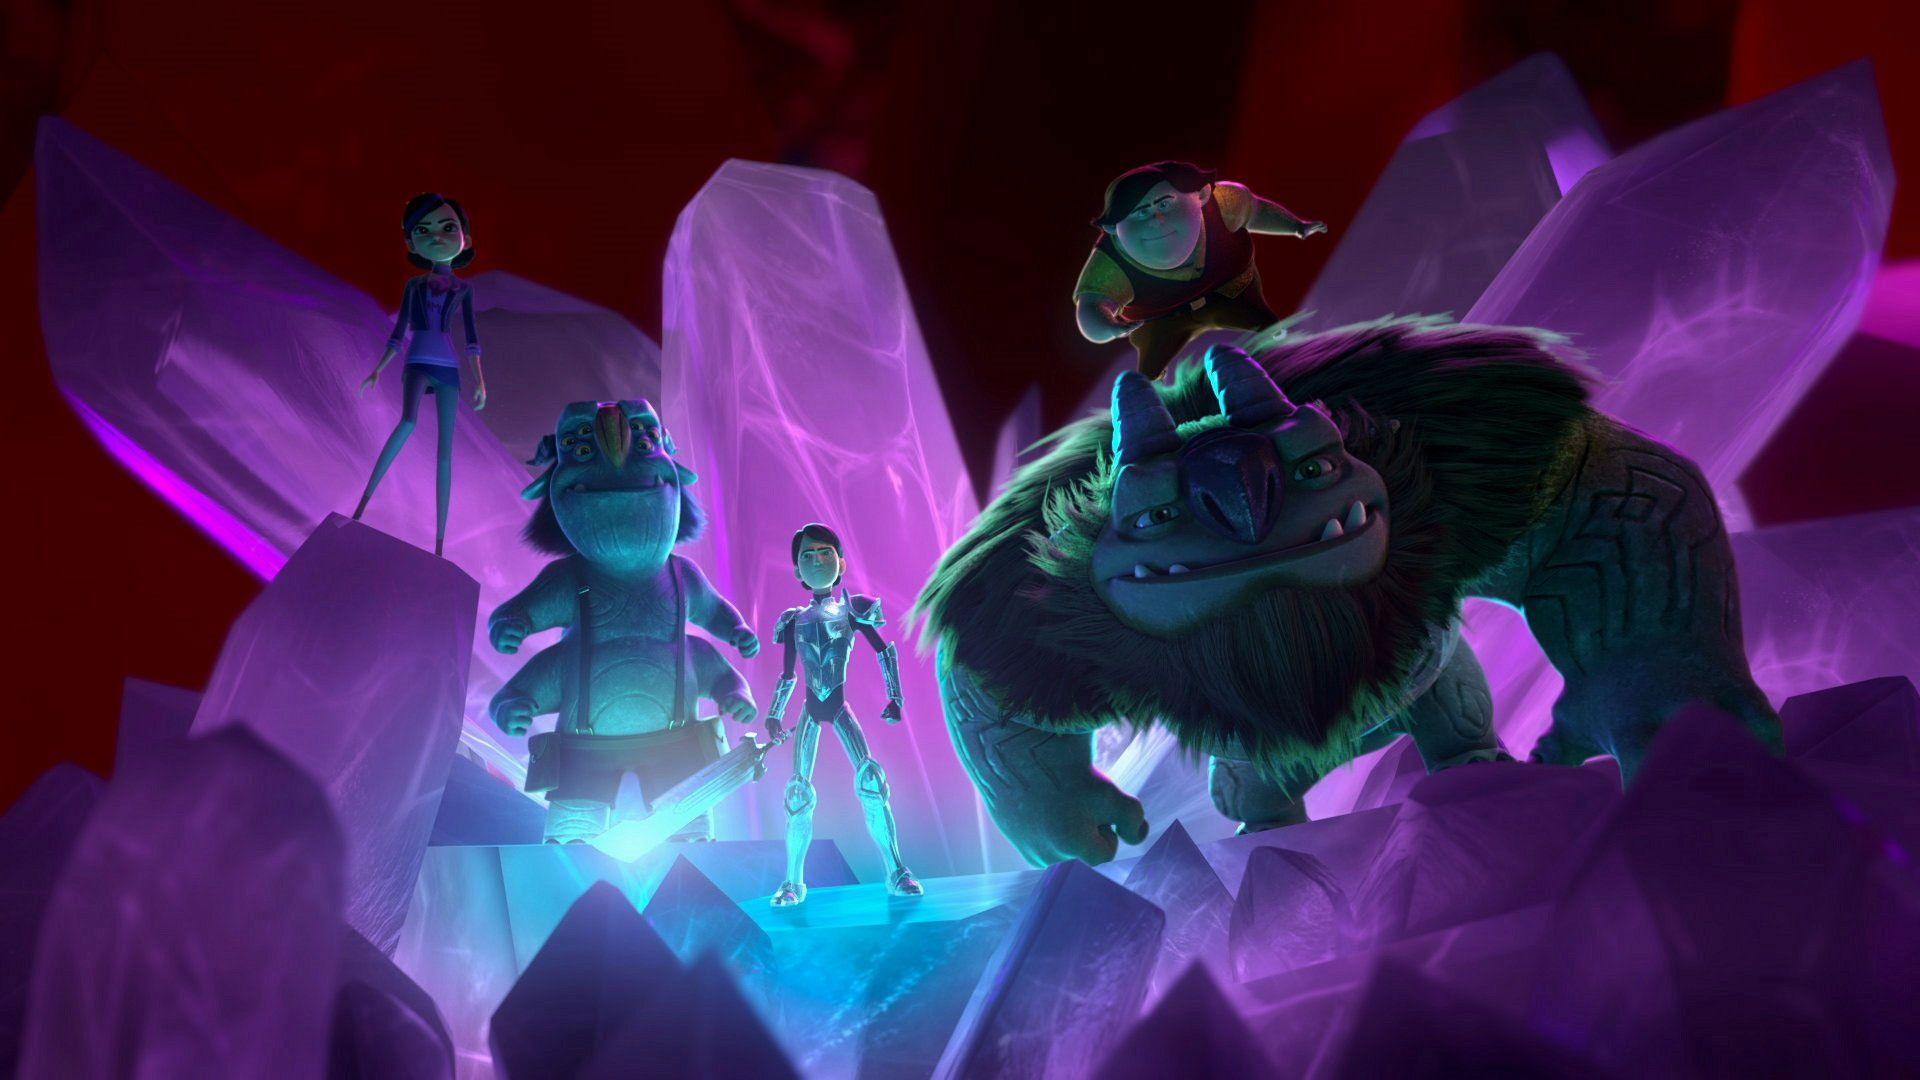 Trollhunters 2016 wallpaper. movies and tv series